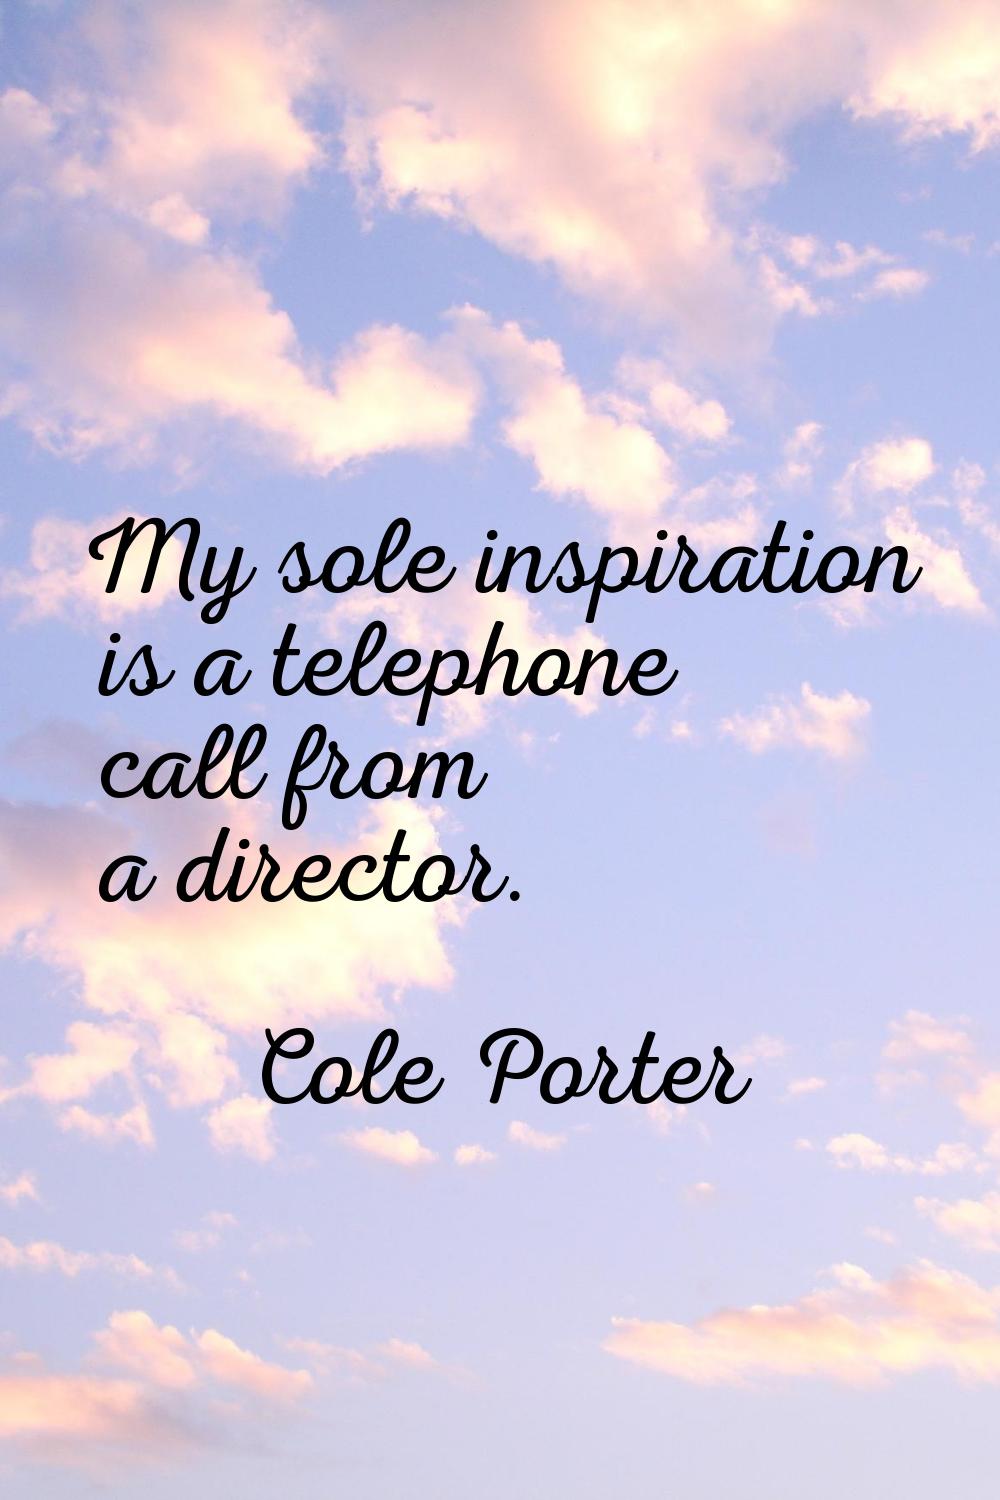 My sole inspiration is a telephone call from a director.